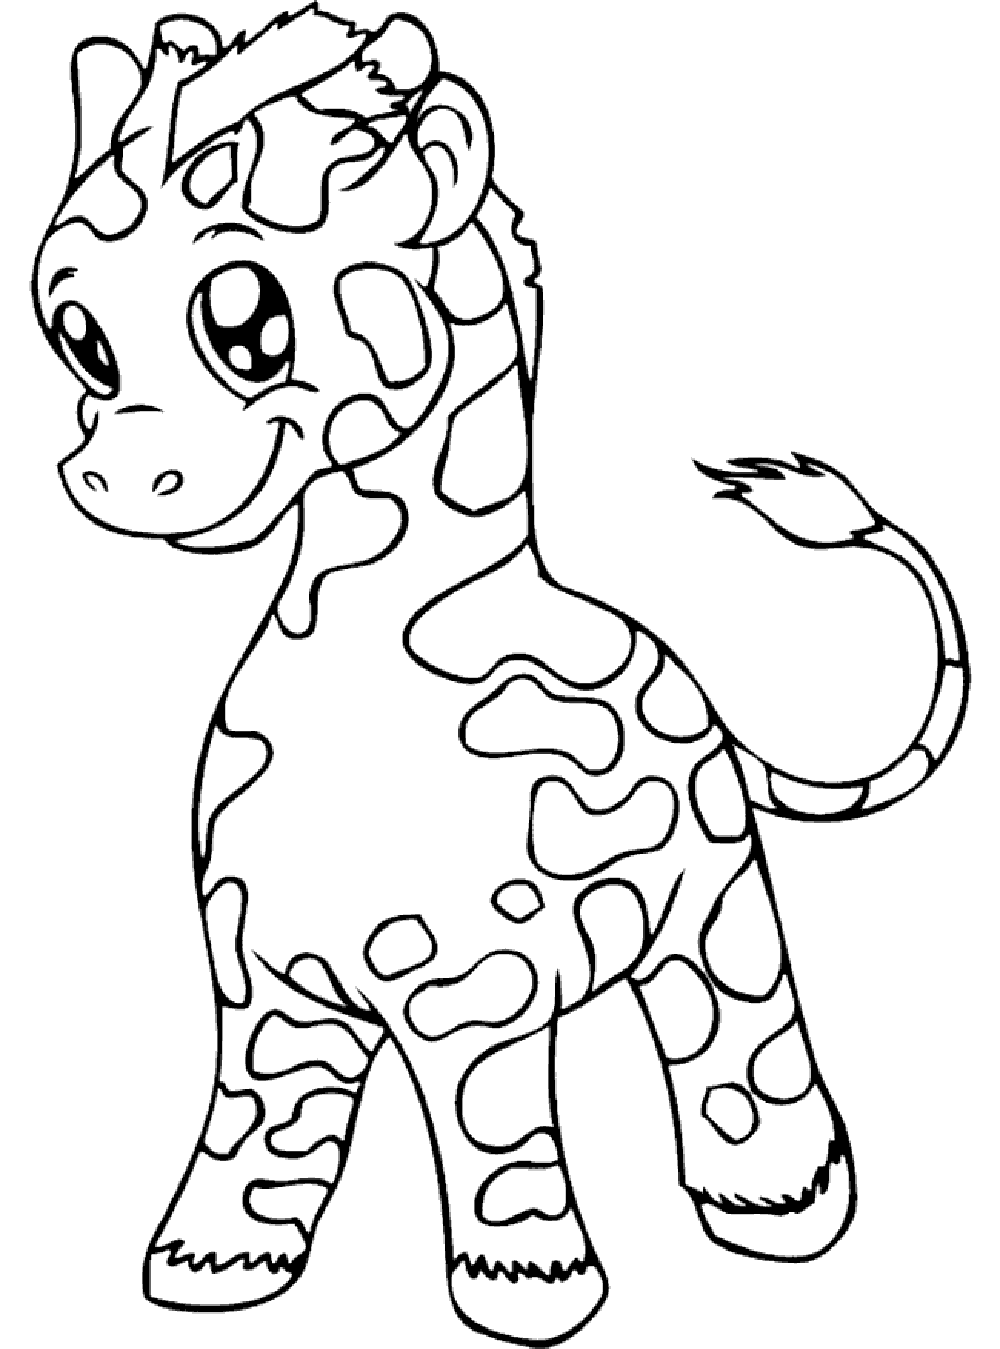 Giraffes to download   Giraffes Kids Coloring Pages